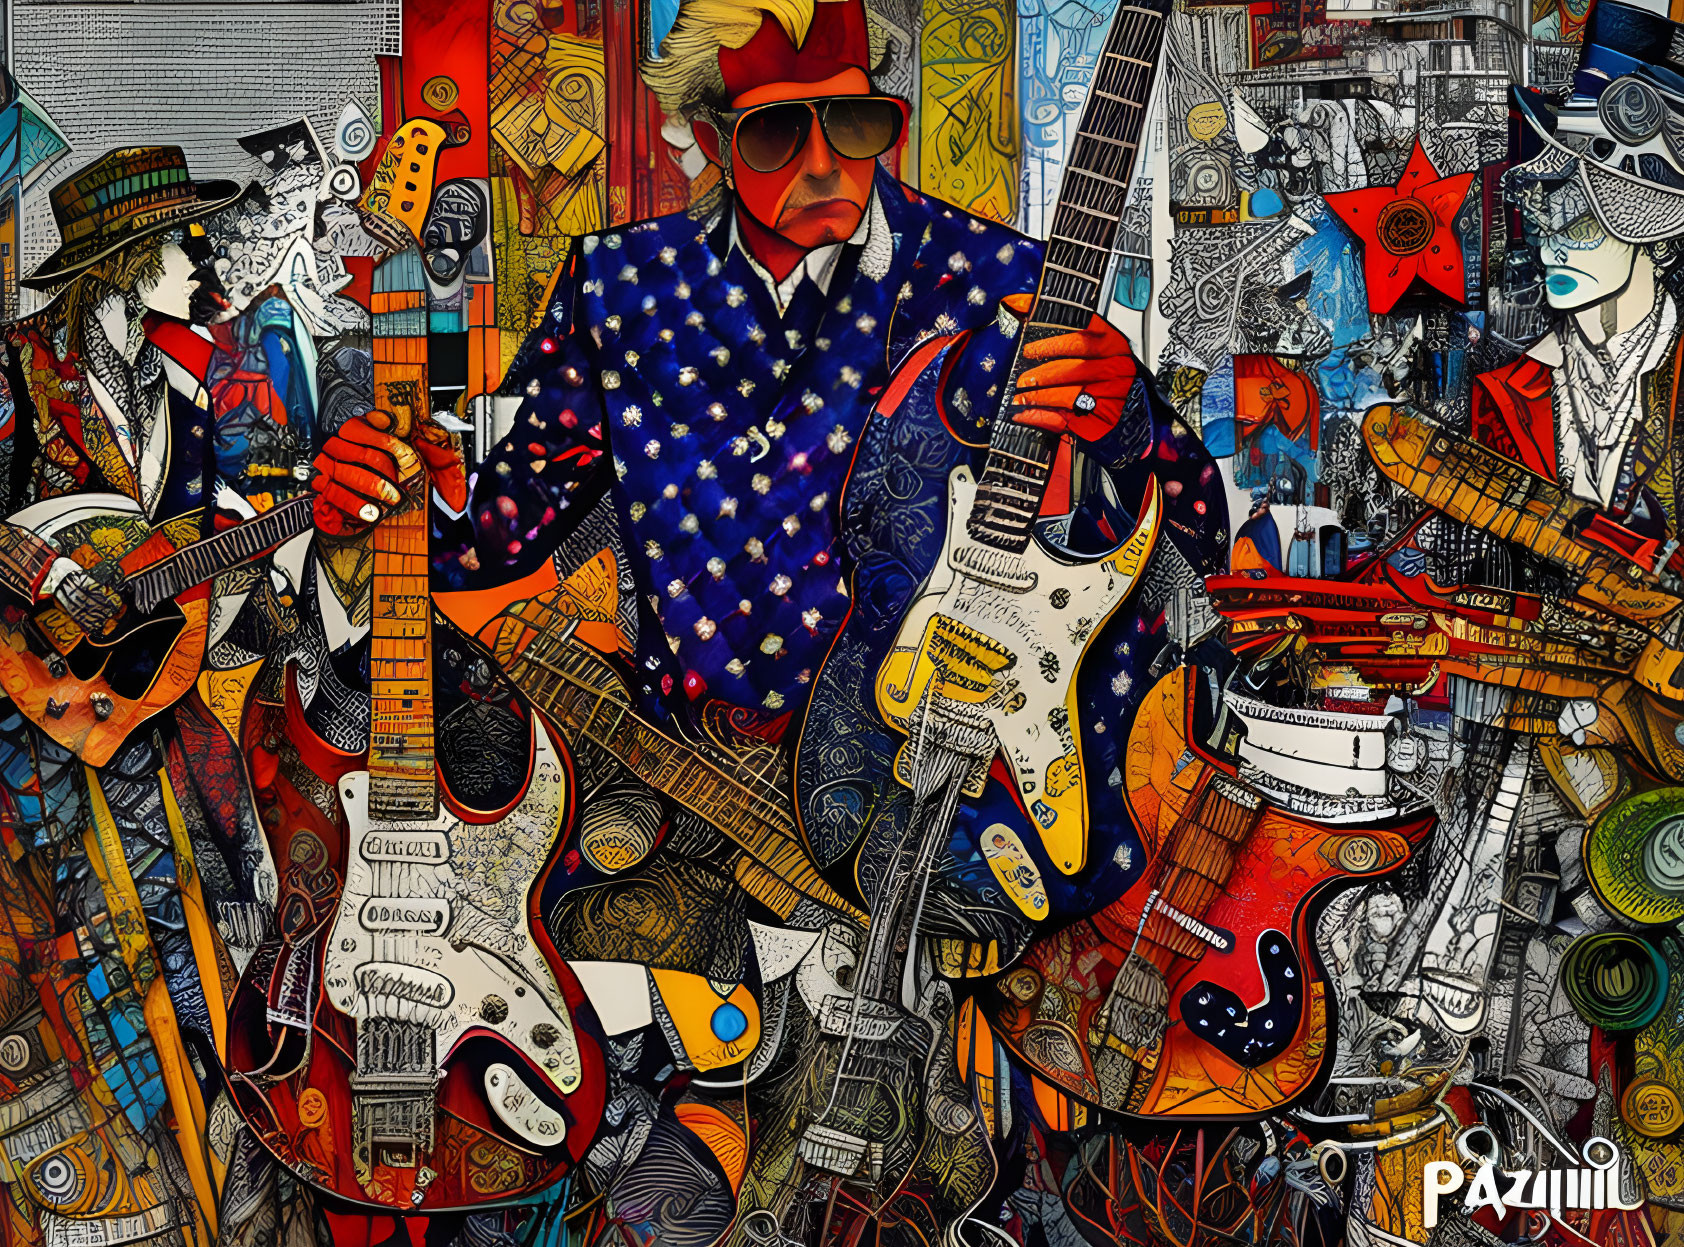 Vibrant artwork with central figure in sunglasses and star-patterned outfit holding guitars